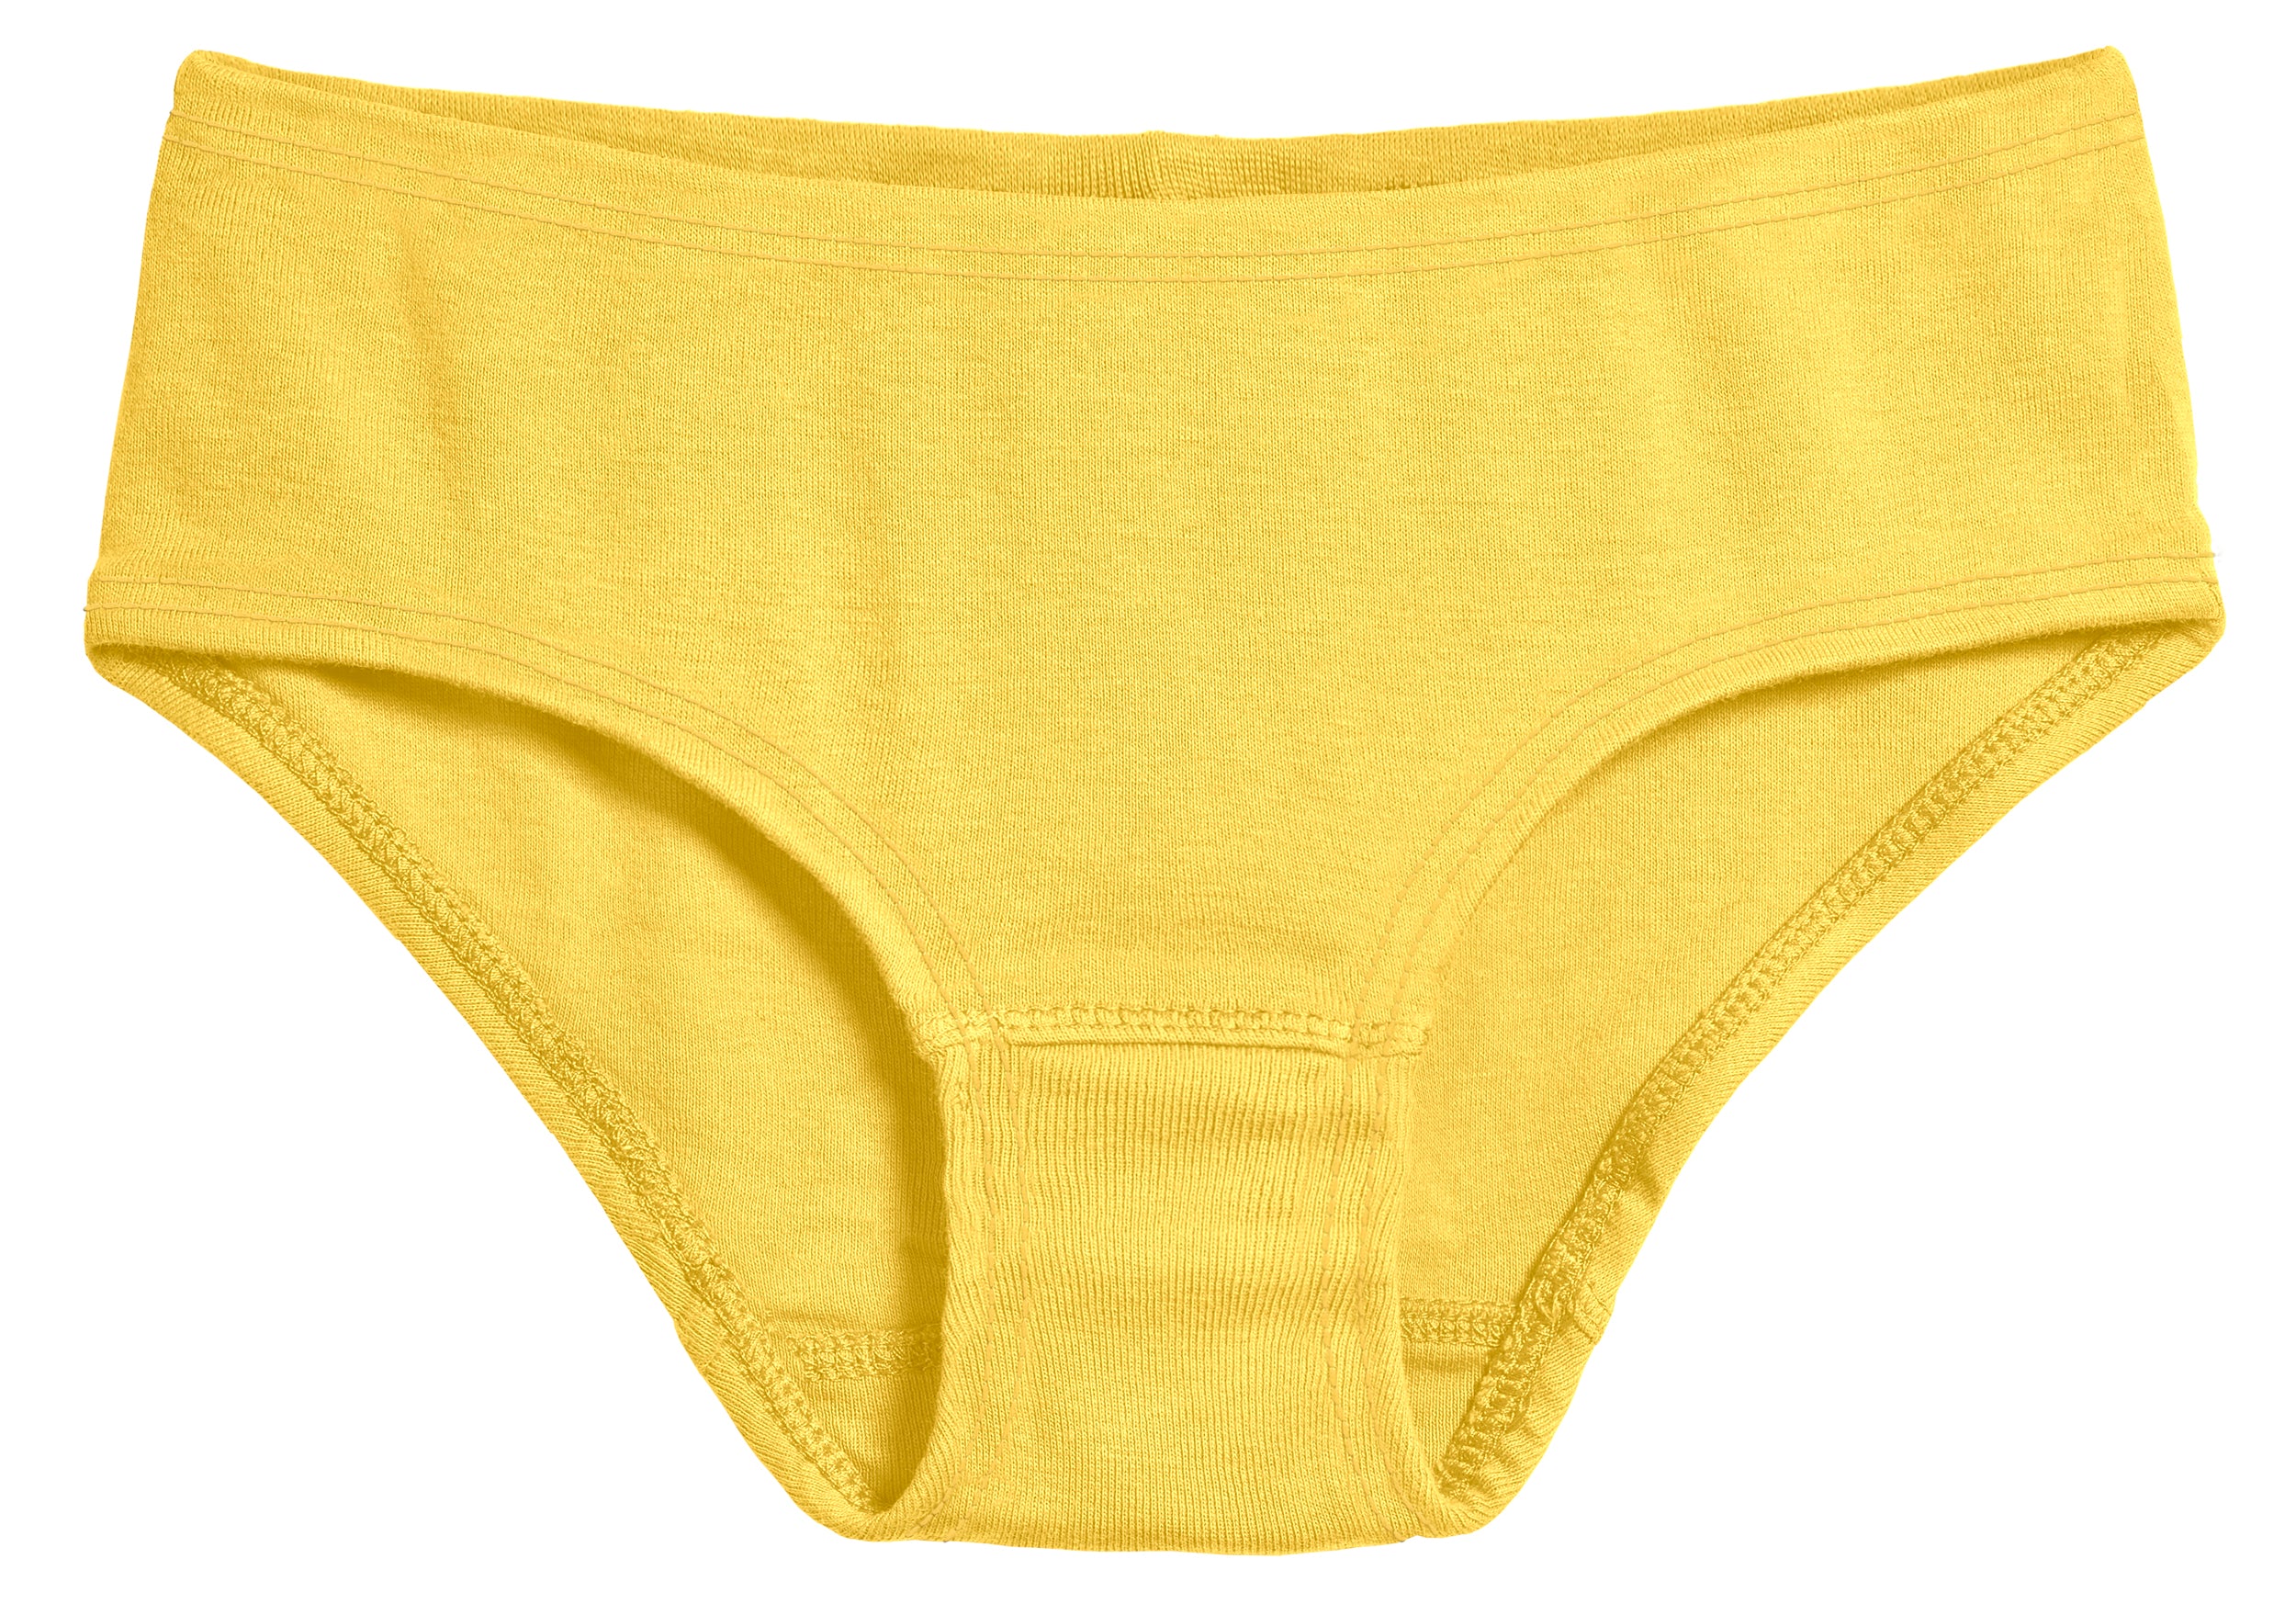 High Waisted Underwear, Organic Cotton Panties, Yellow Panties, Womens  Pattern Underwear, Natural Dye Lingerie, High Rise, Lingerie for Her -   Canada